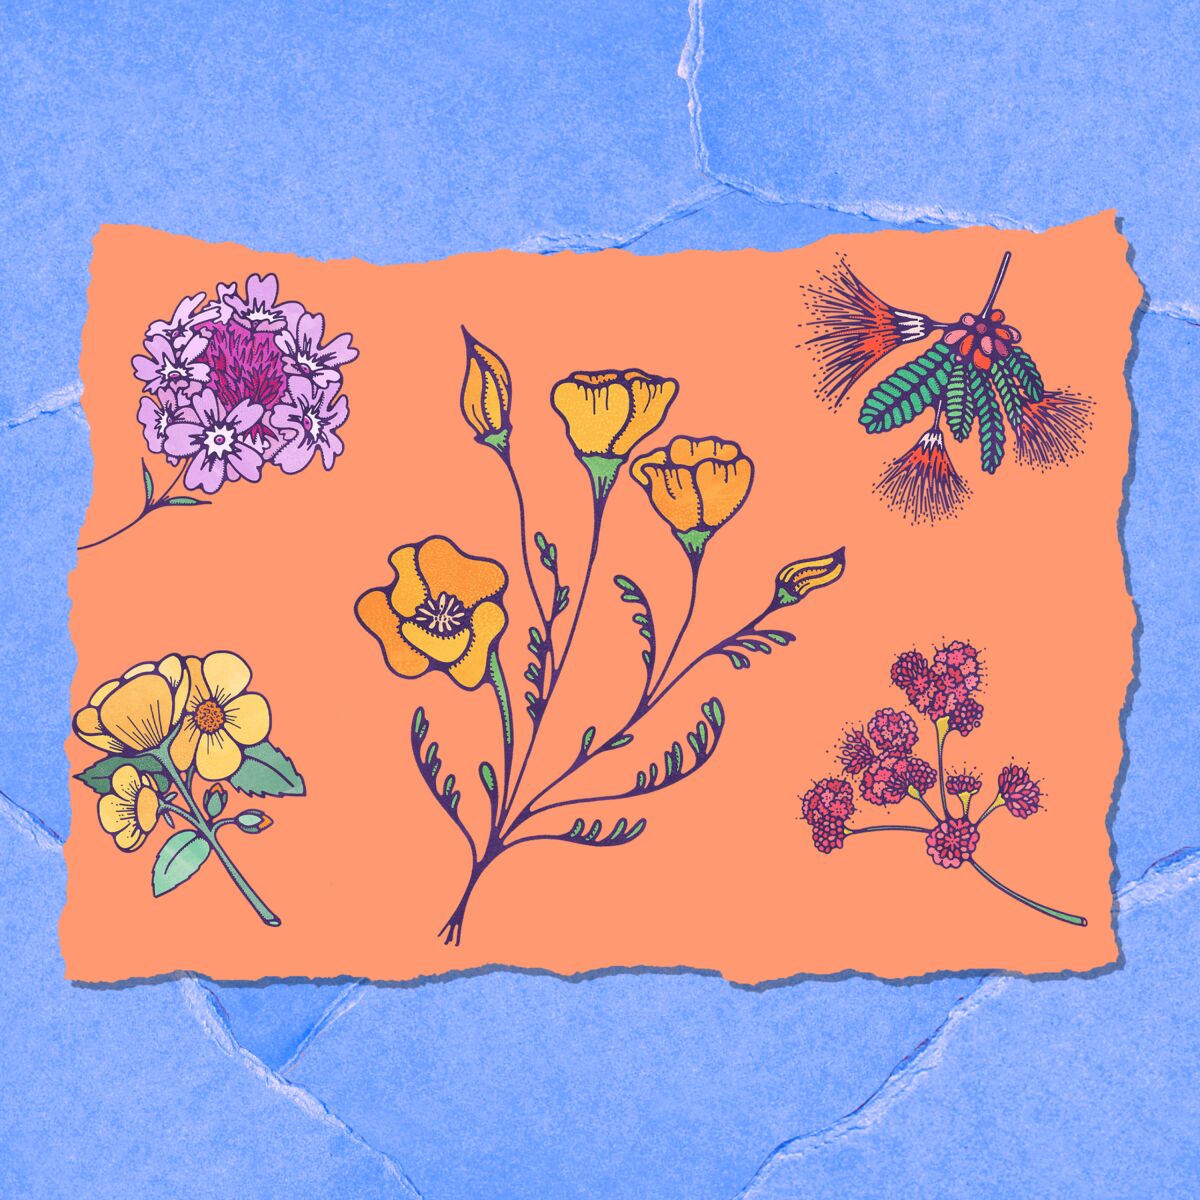 An illustration of five different flowers.